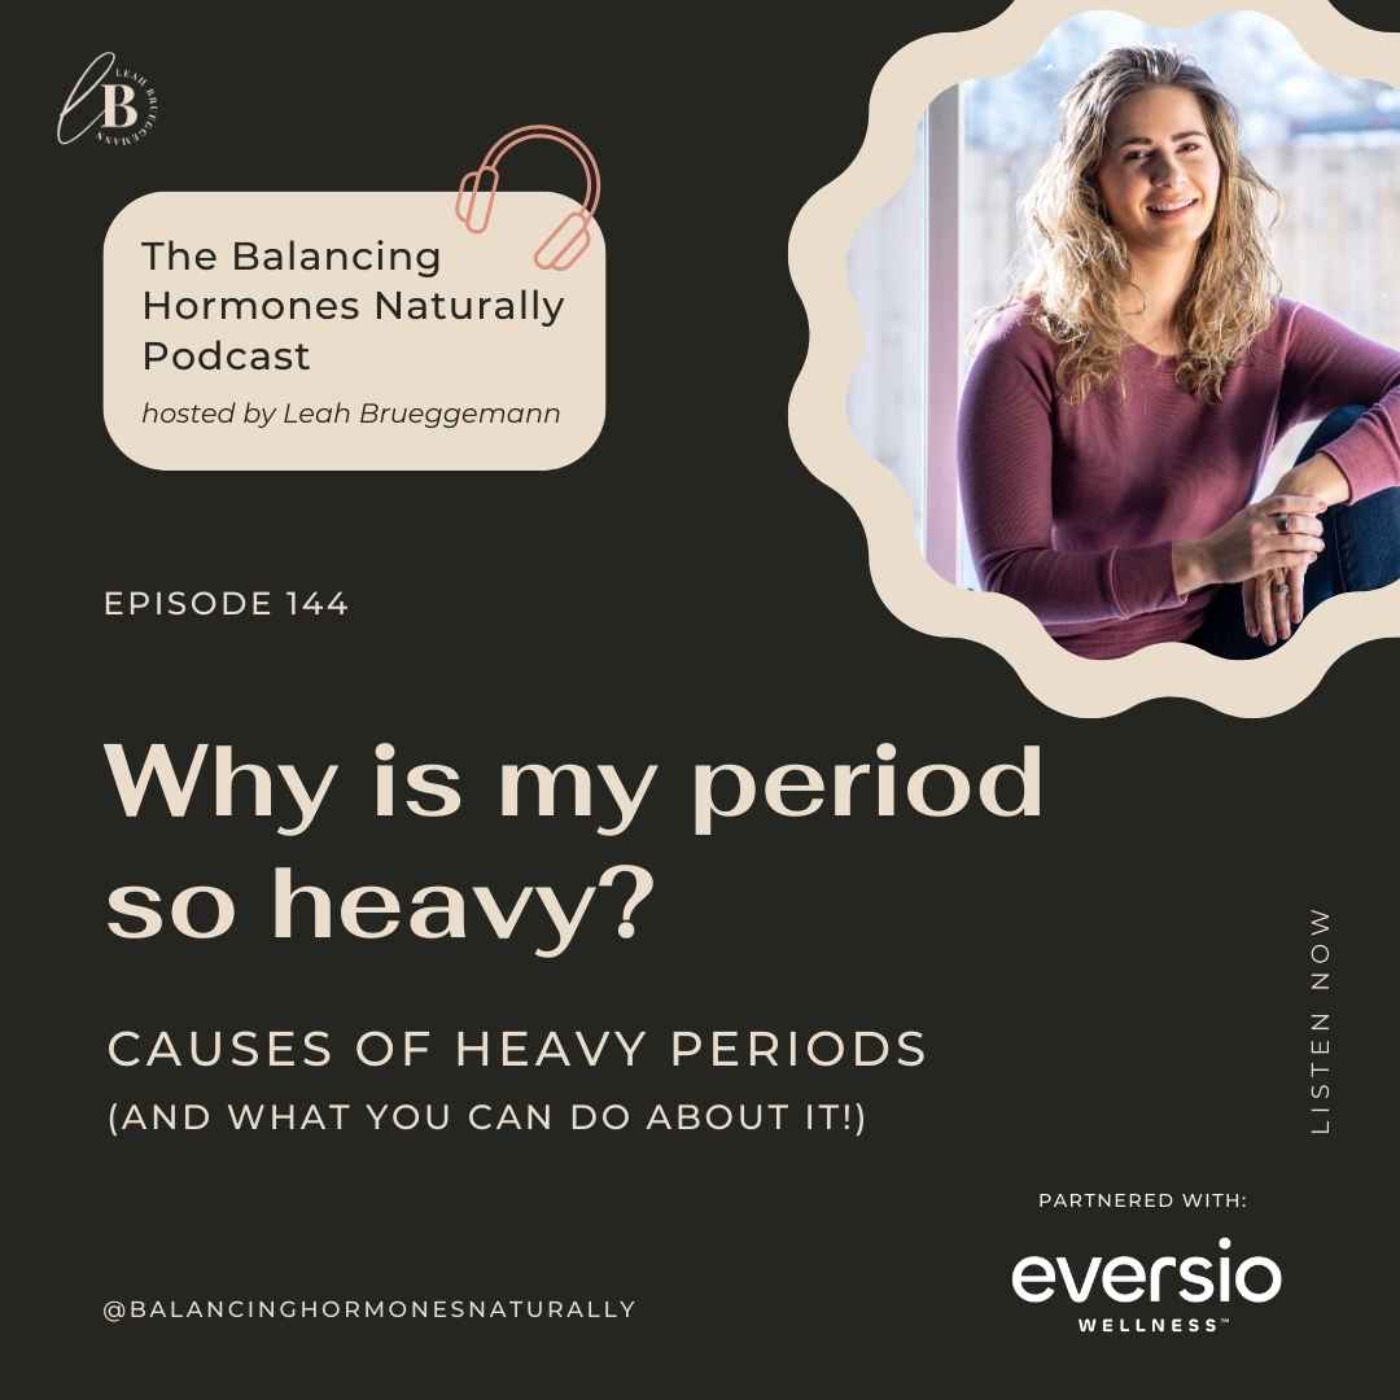 Episode 144: Why is my period so heavy?